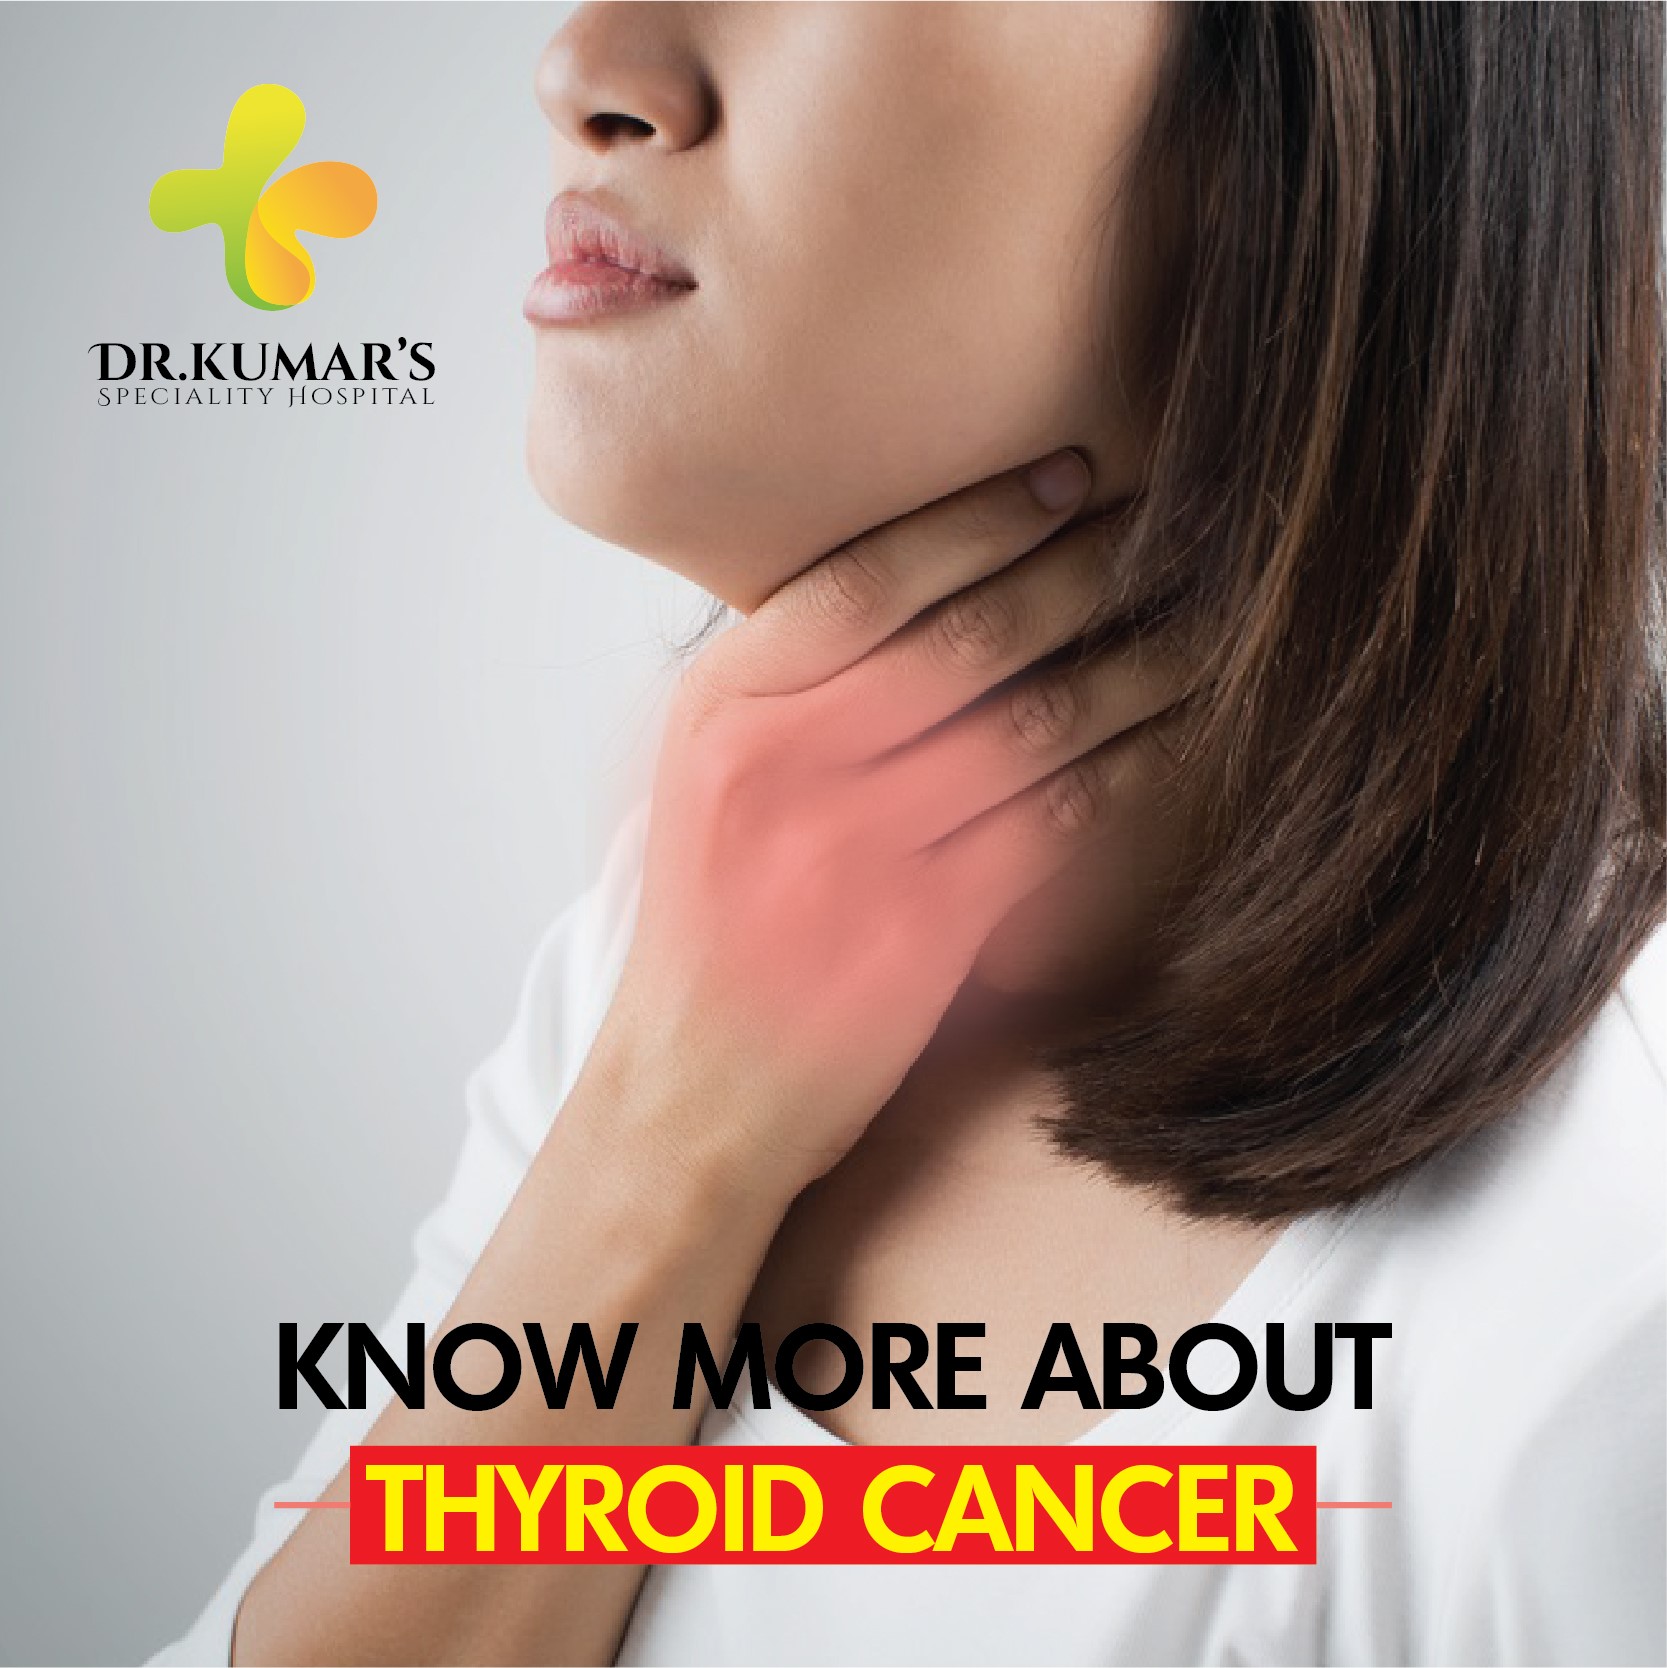 KNOW MORE ABOUT THYROID CANCER - Dr.Kumar's Hospital